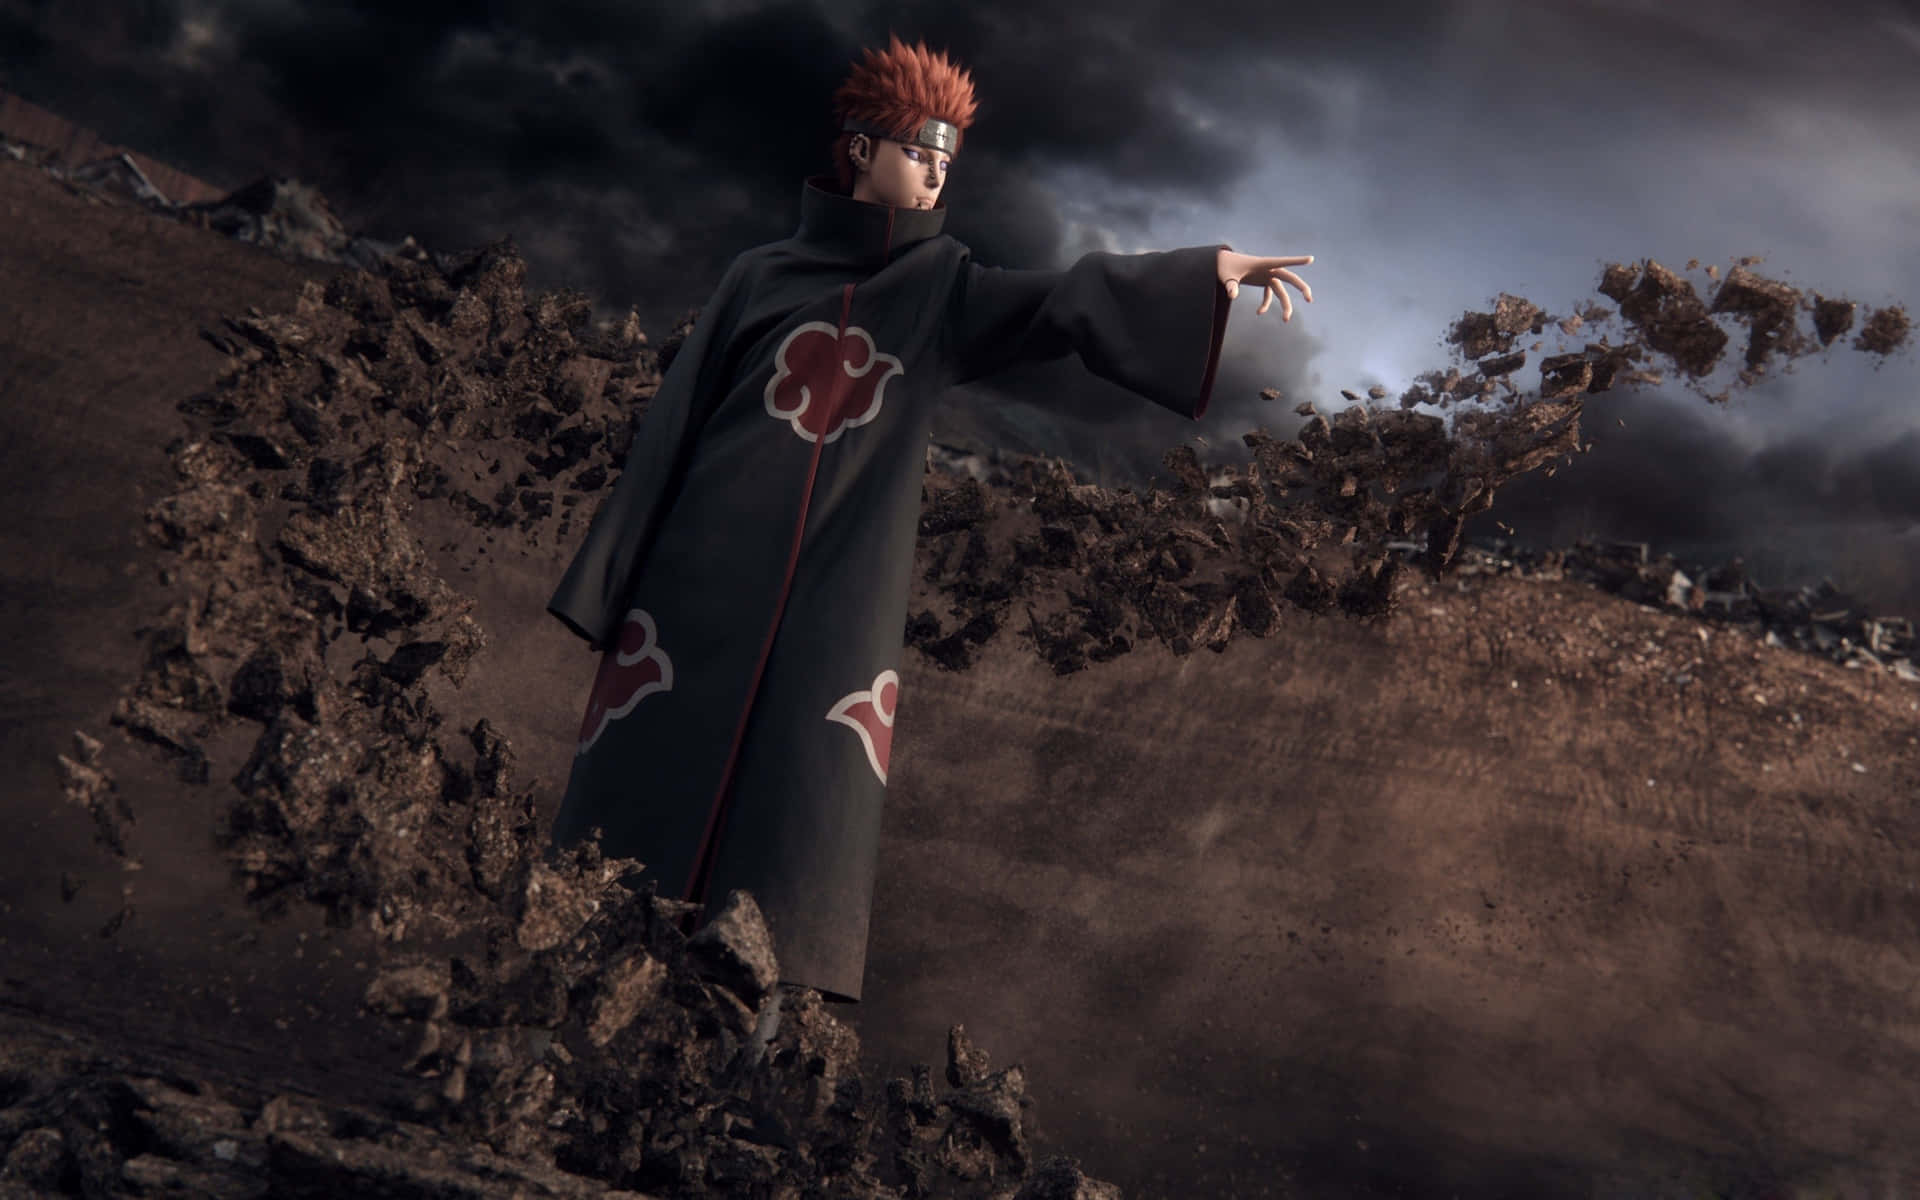 Get ready for adventure with the Naruto Macbook Pro Wallpaper